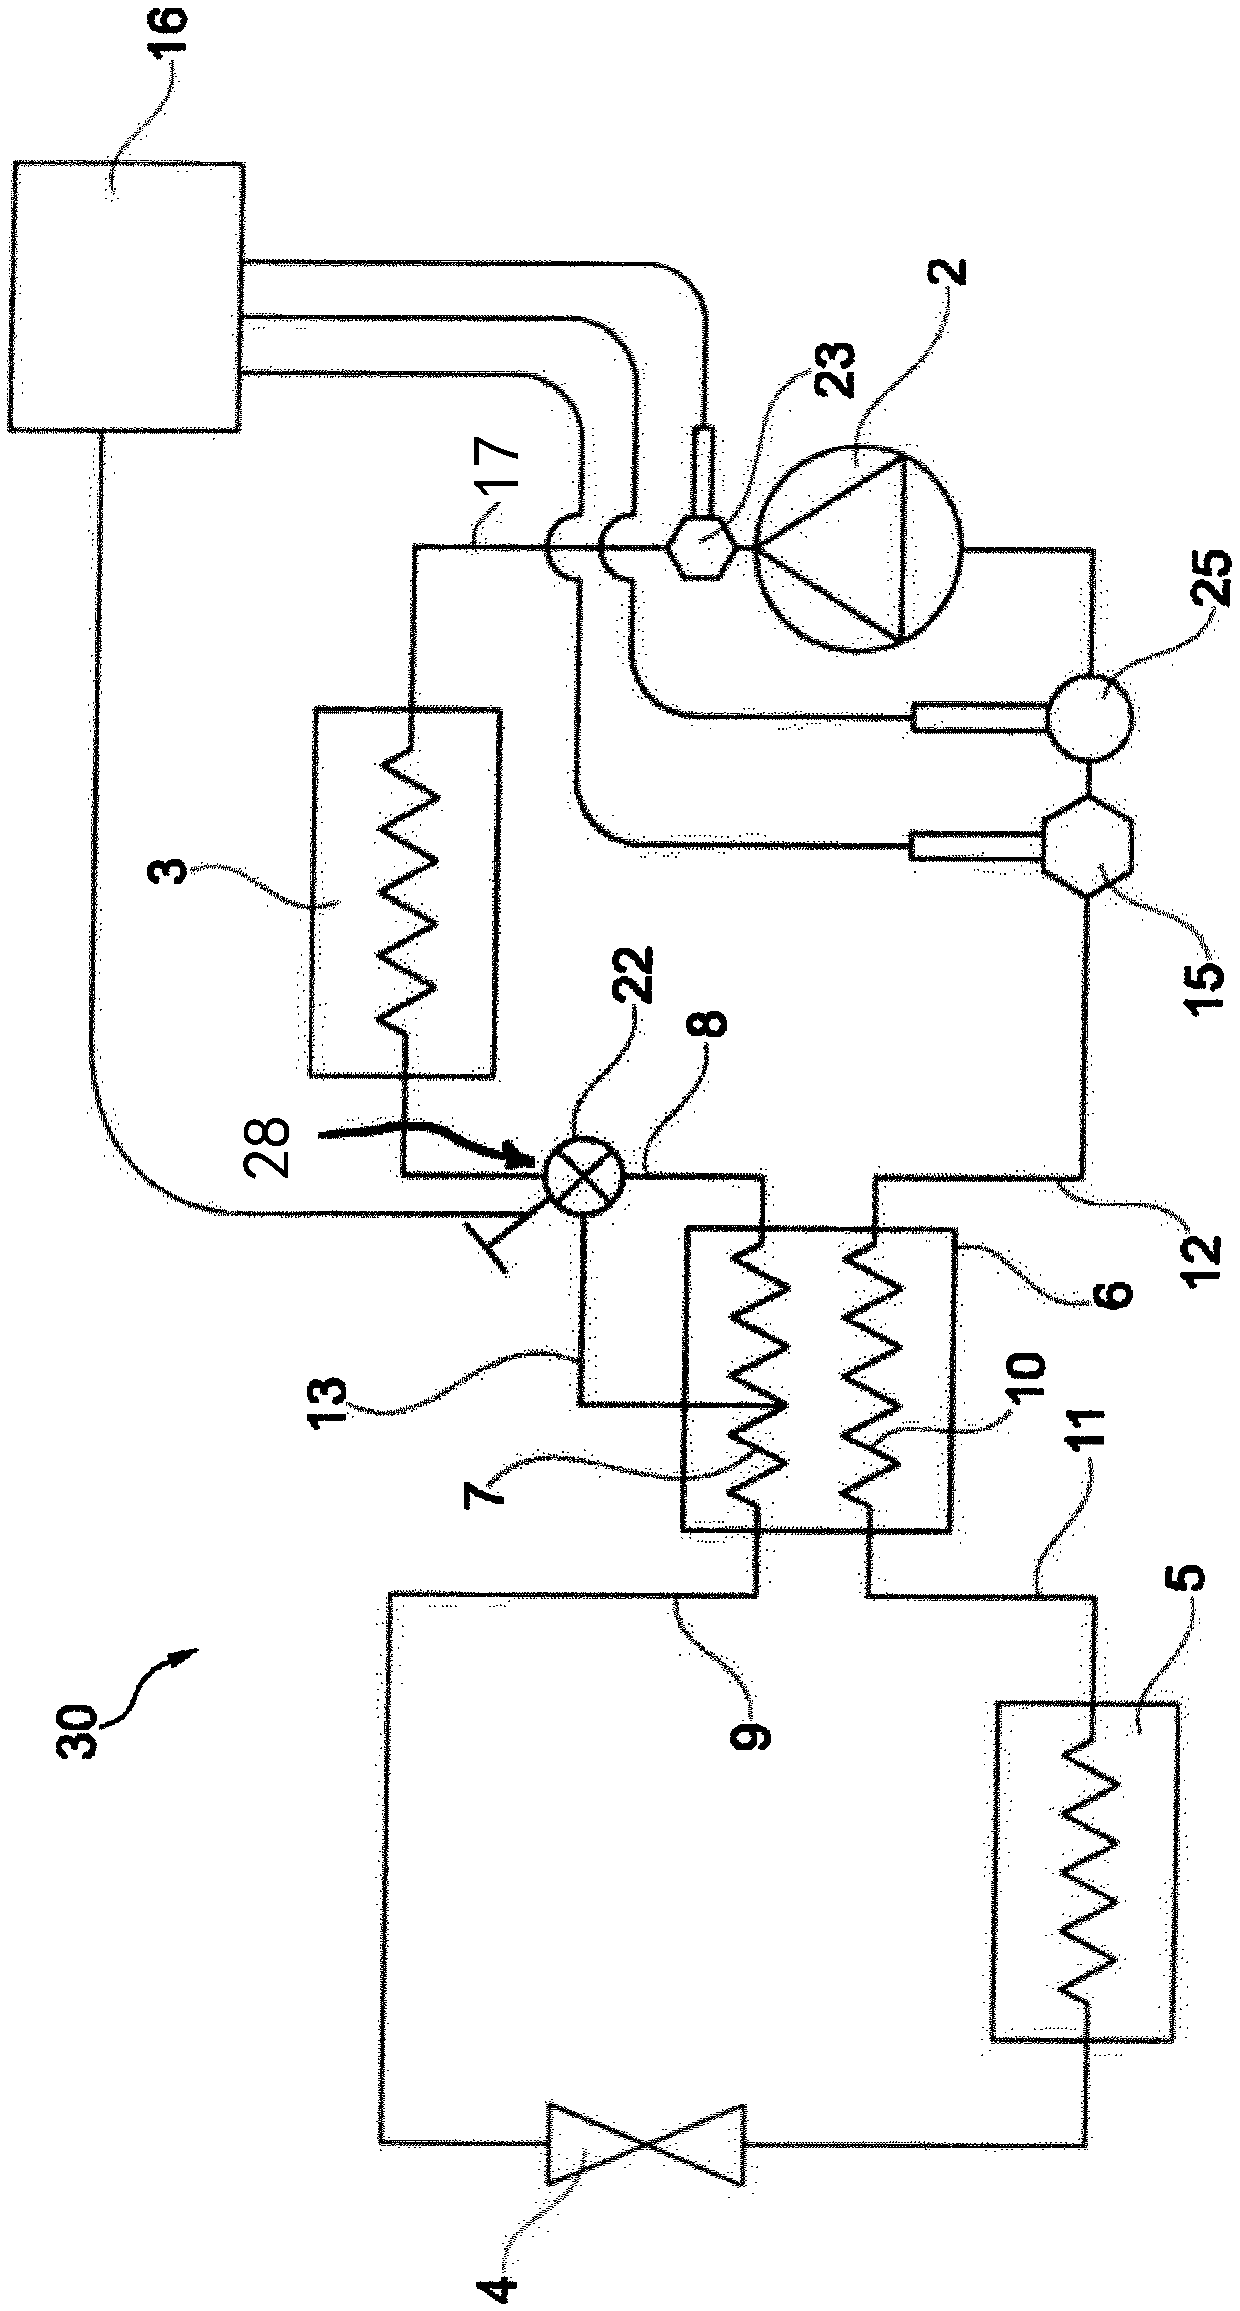 Cooling system with adjustable internal heat exchanger